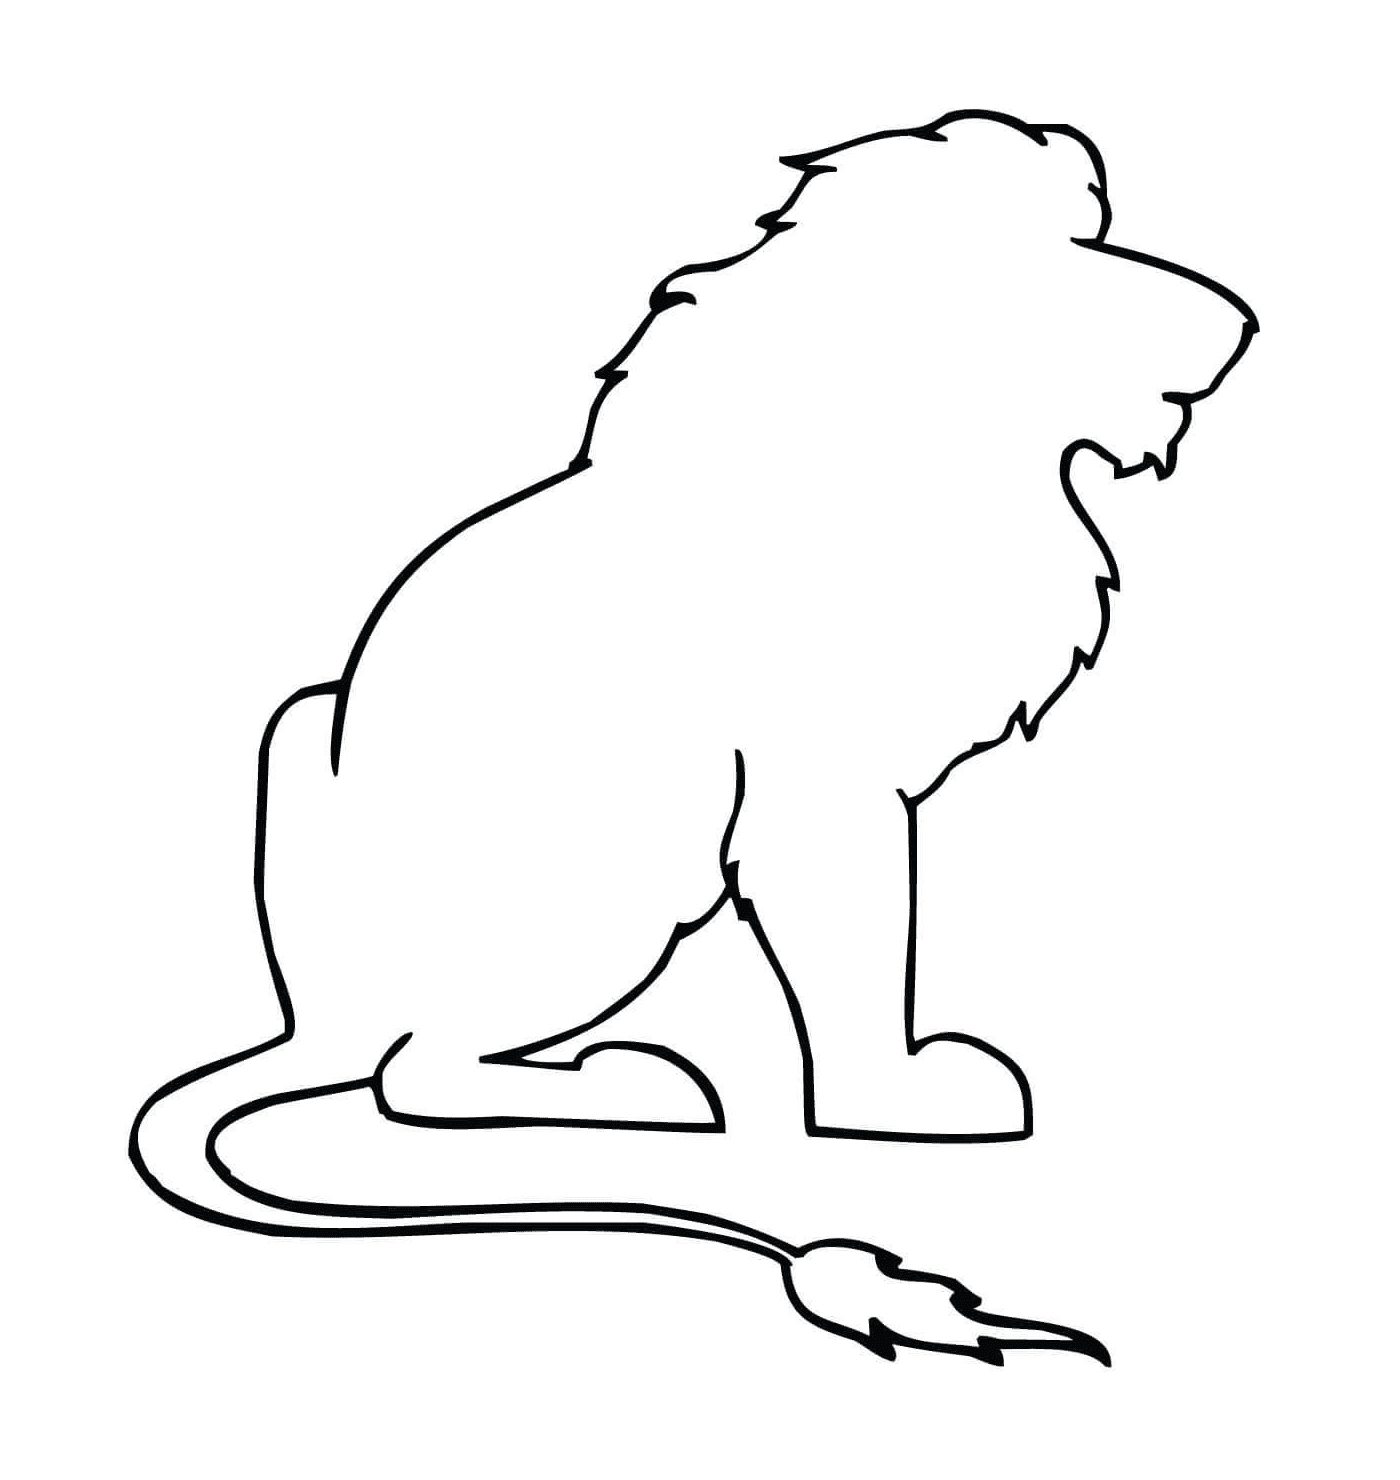  lioness sitting in silhouette 